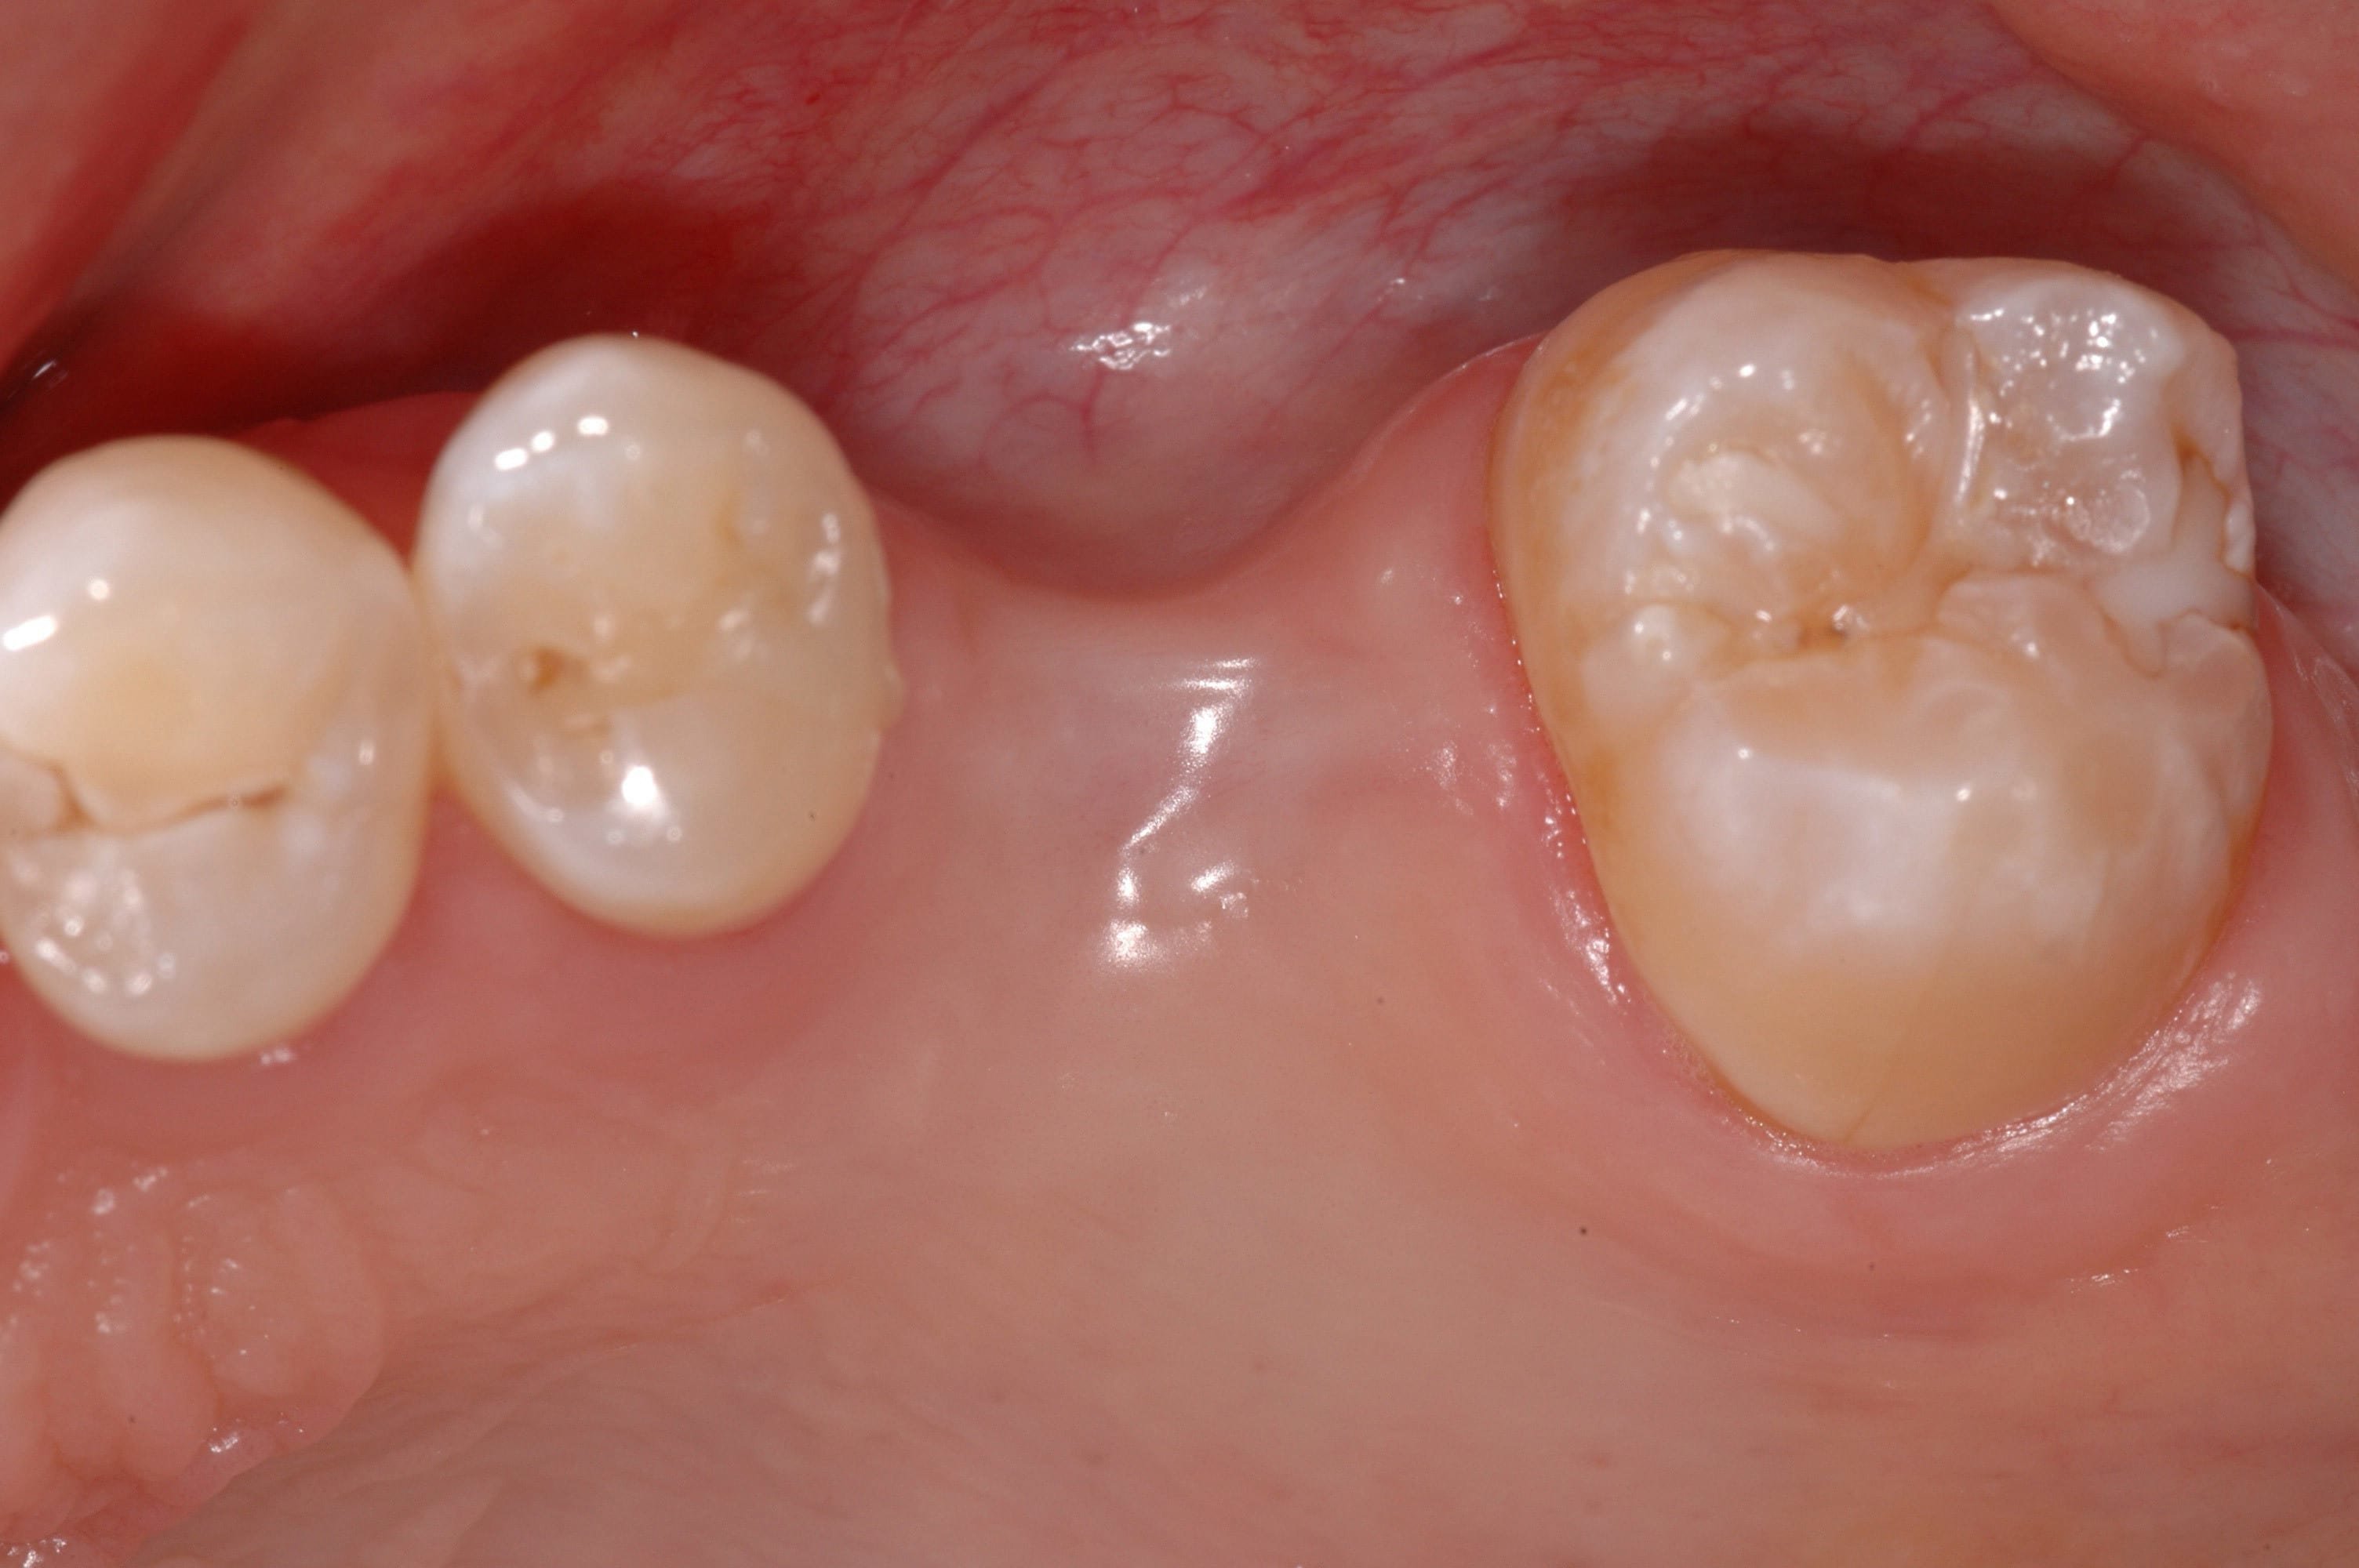 Figure 1: Initial clinical presentation of a 41-year old male patient referred for dental implant treatment planning